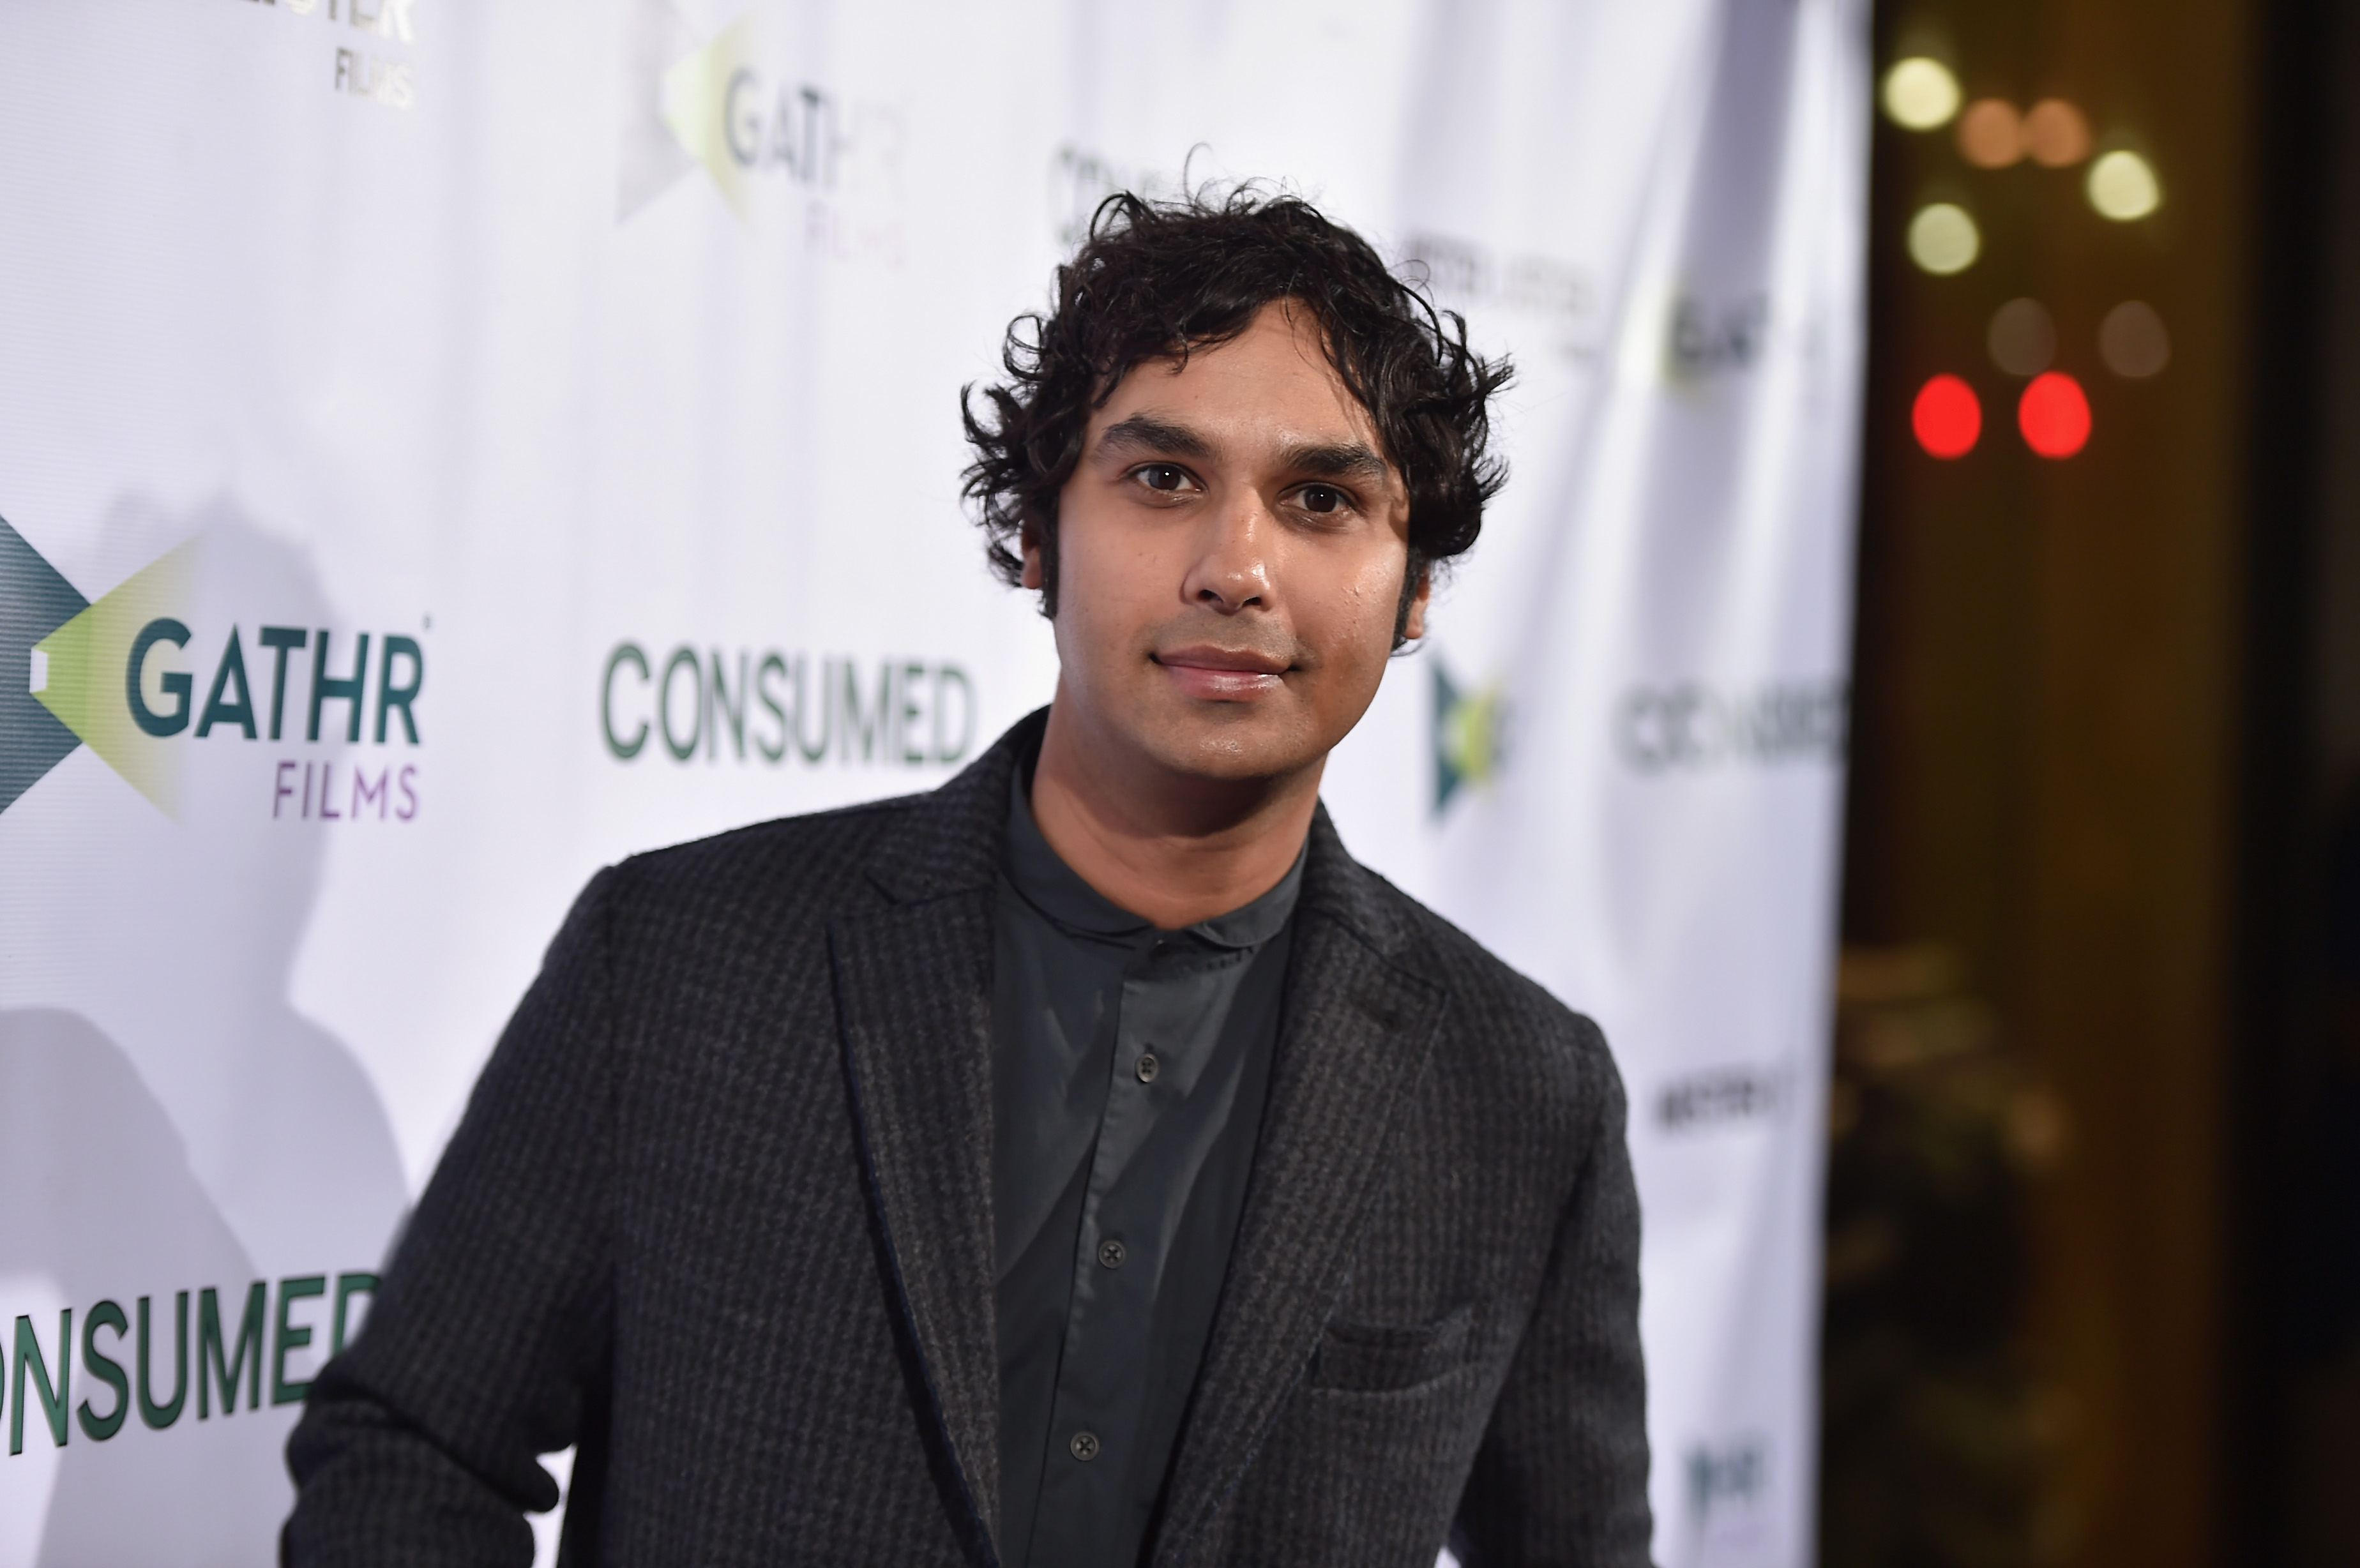 This is a photo of TV actor Kunal Nayyar.